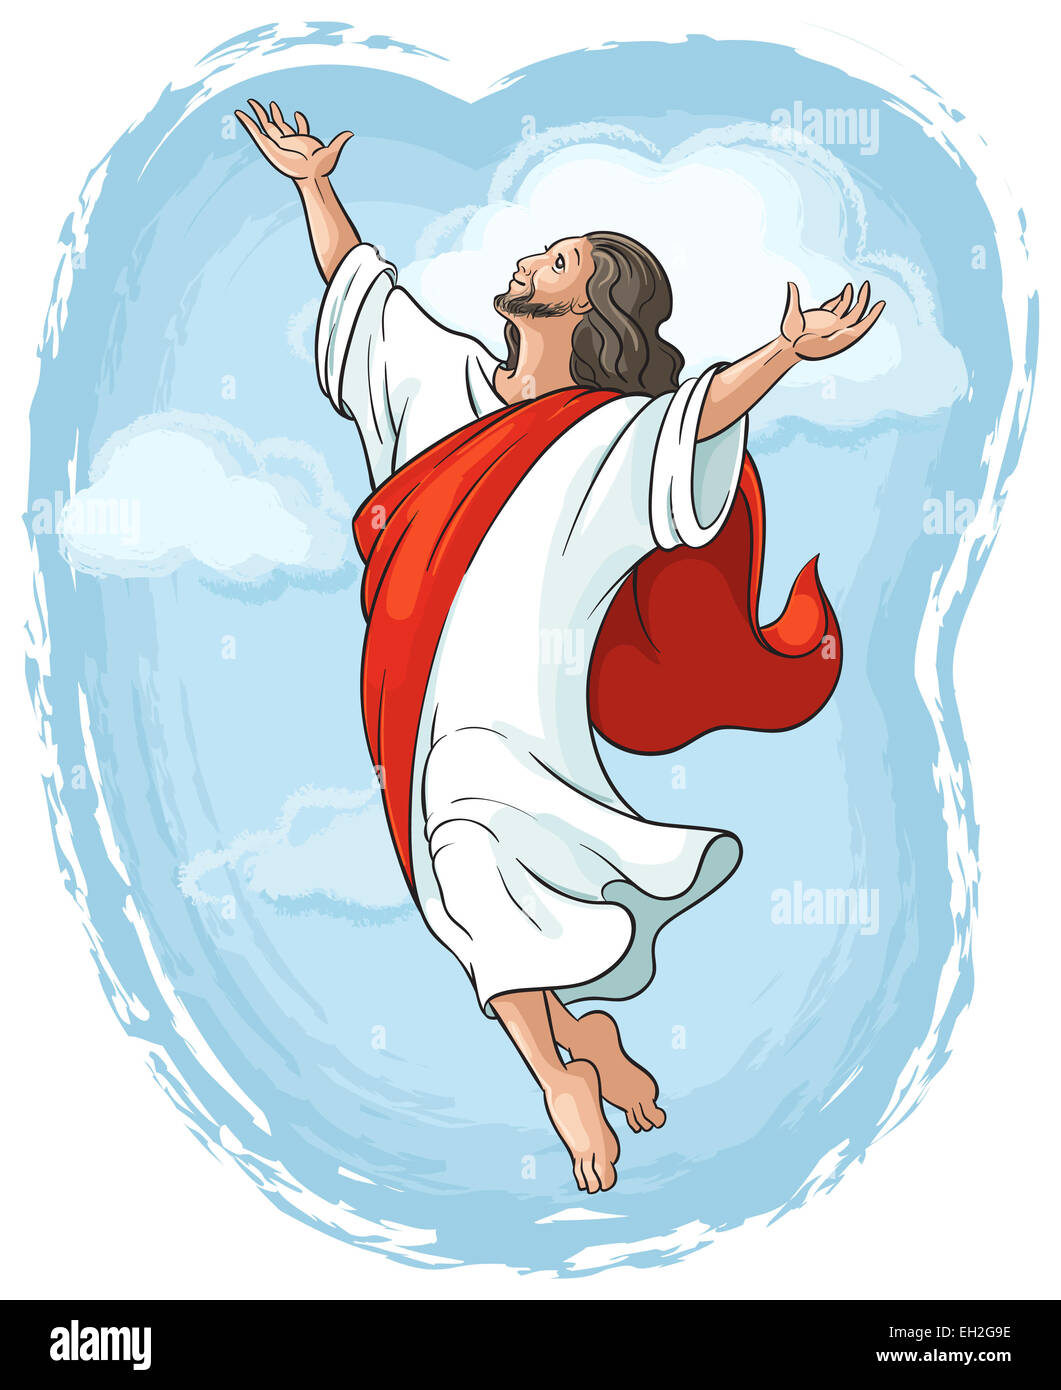 Ascension of Jesus raising hands to God in blue sky between clouds. Cartoon christian colored illustration of Events in Jesus' Life Stock Photo